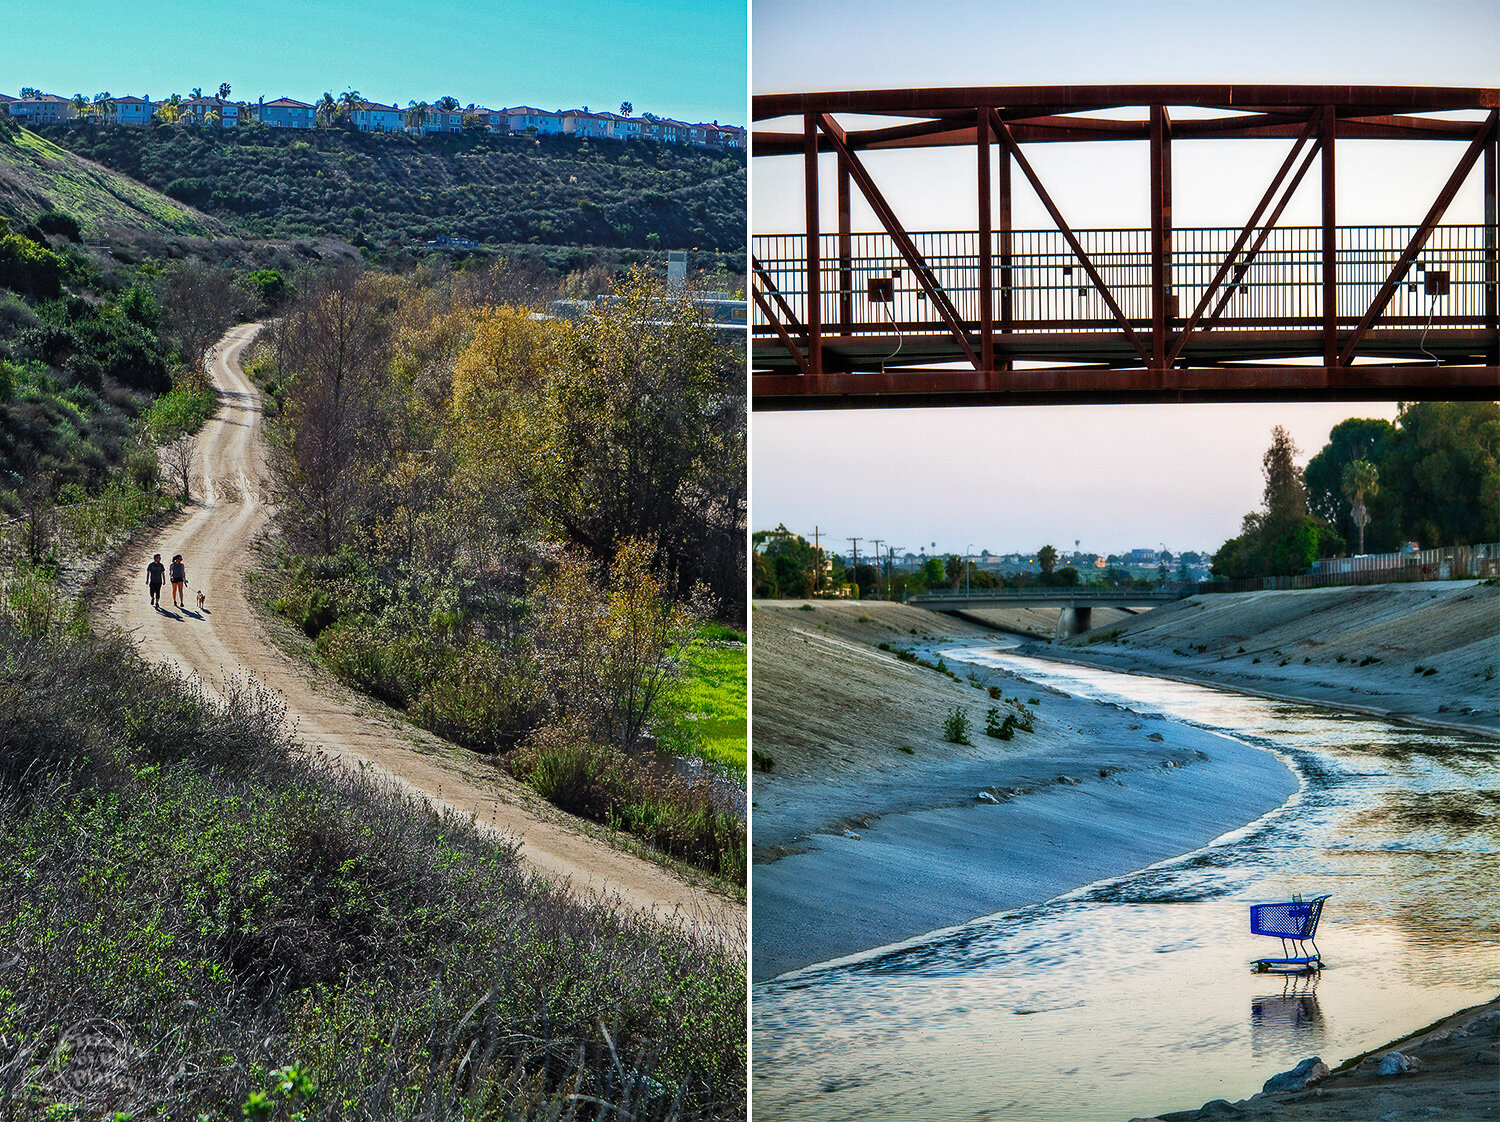  A maintenance road offers locals an area for walking, it is located between the Playa Vista development and the bluffs of Westchester and Loyola Marymount University.  A shopping cart under a pedestrian bridge in Ballona Creek in Culver City. 